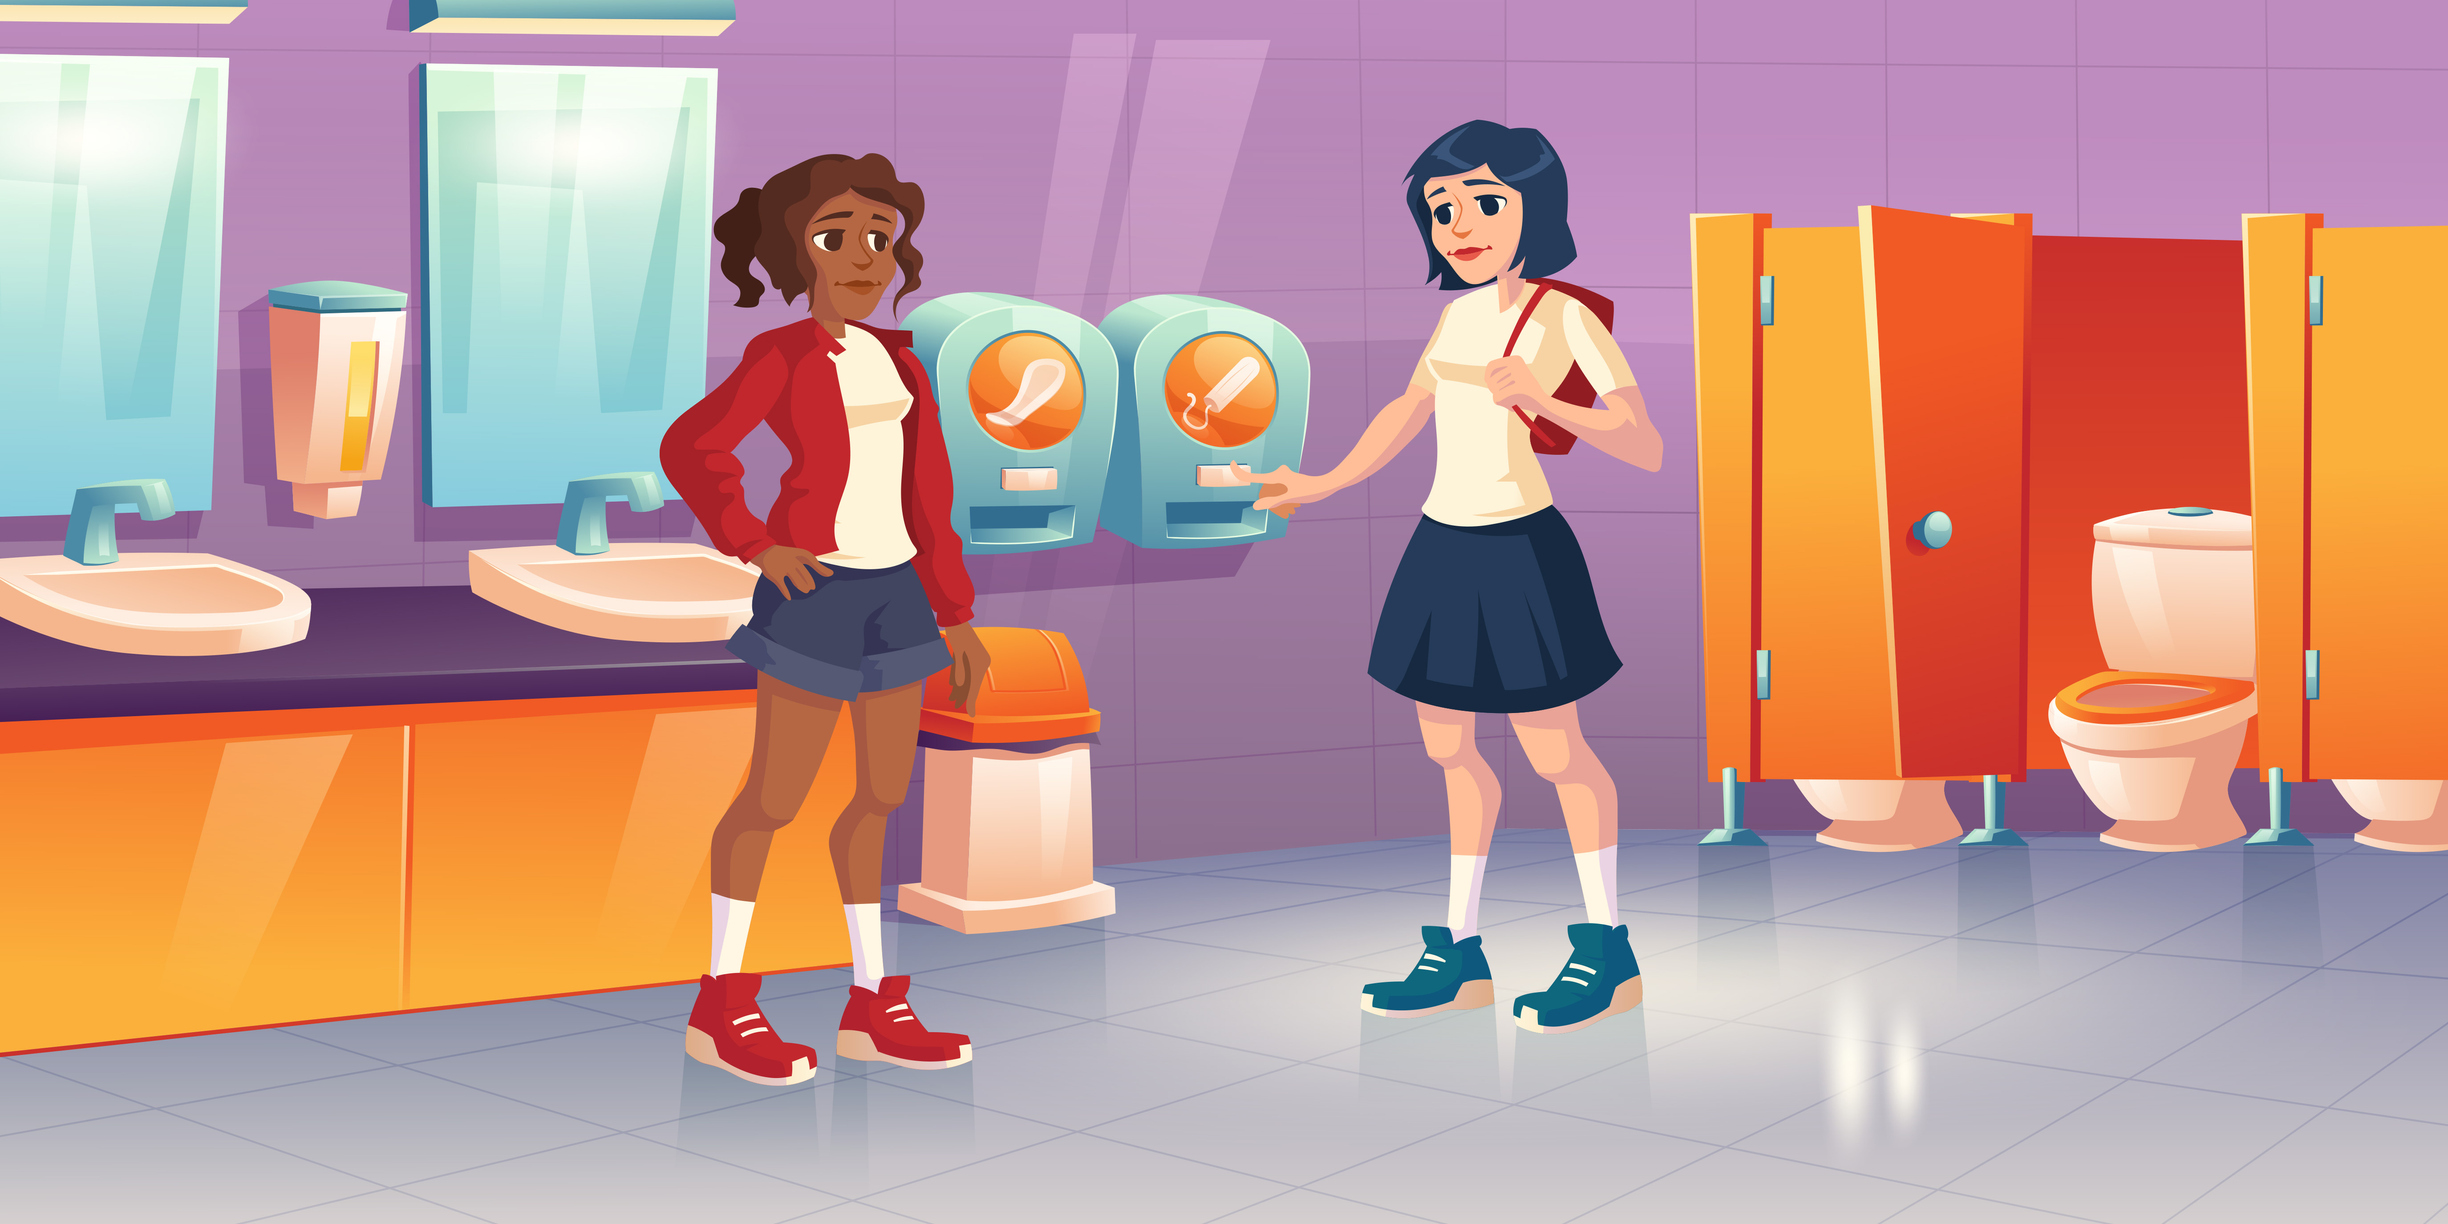 Girls in public restroom with tampon vending machine stock illustration